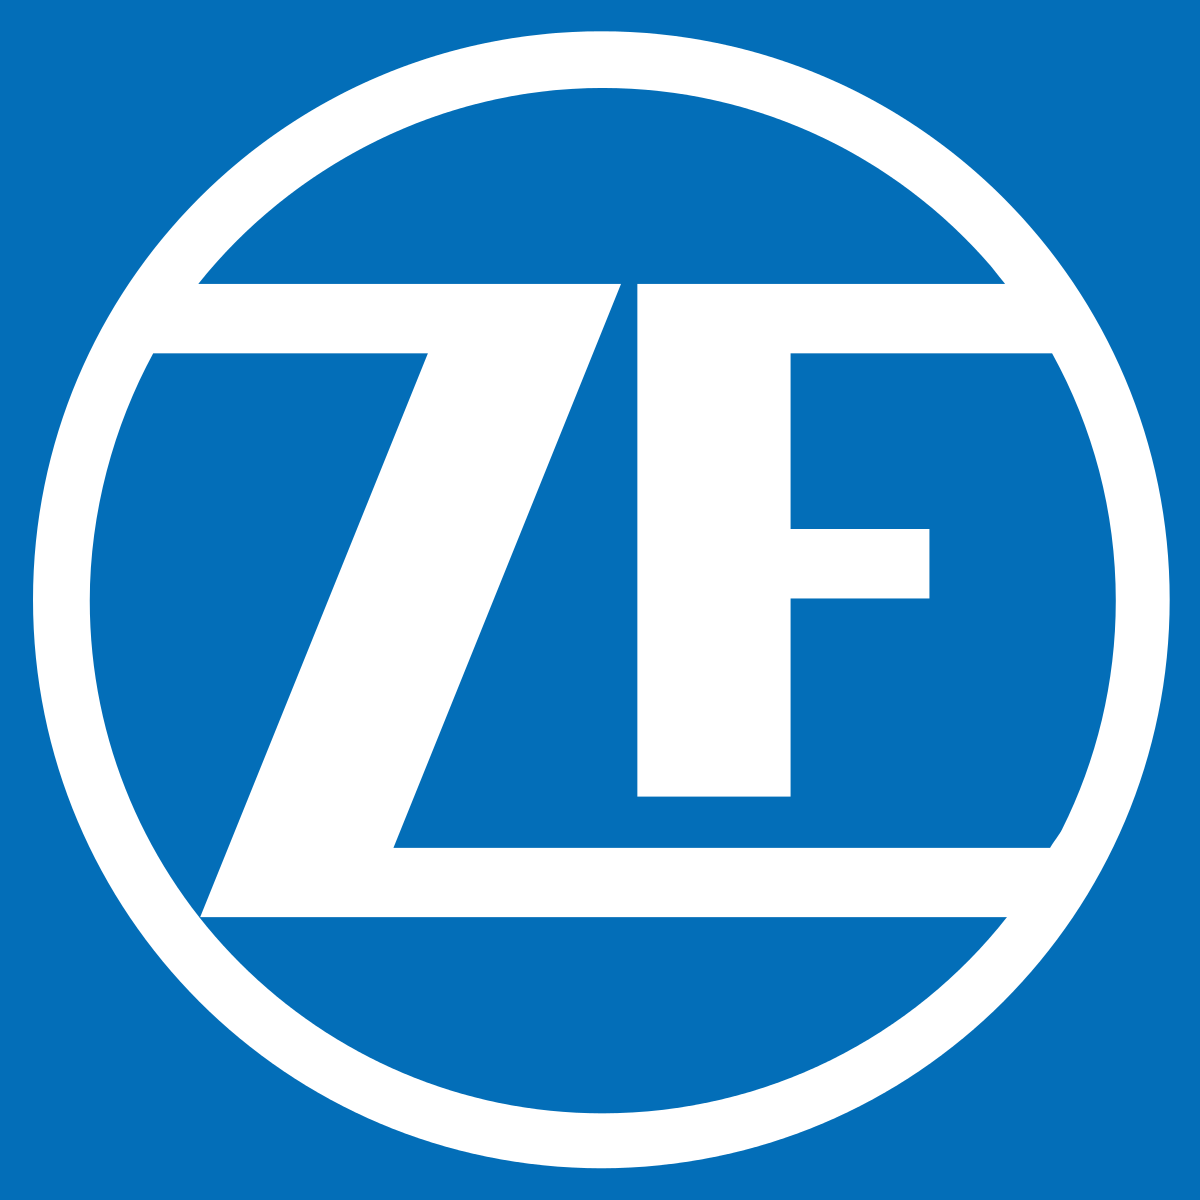 The ZF Aftermarket Brands – ZF, TRW